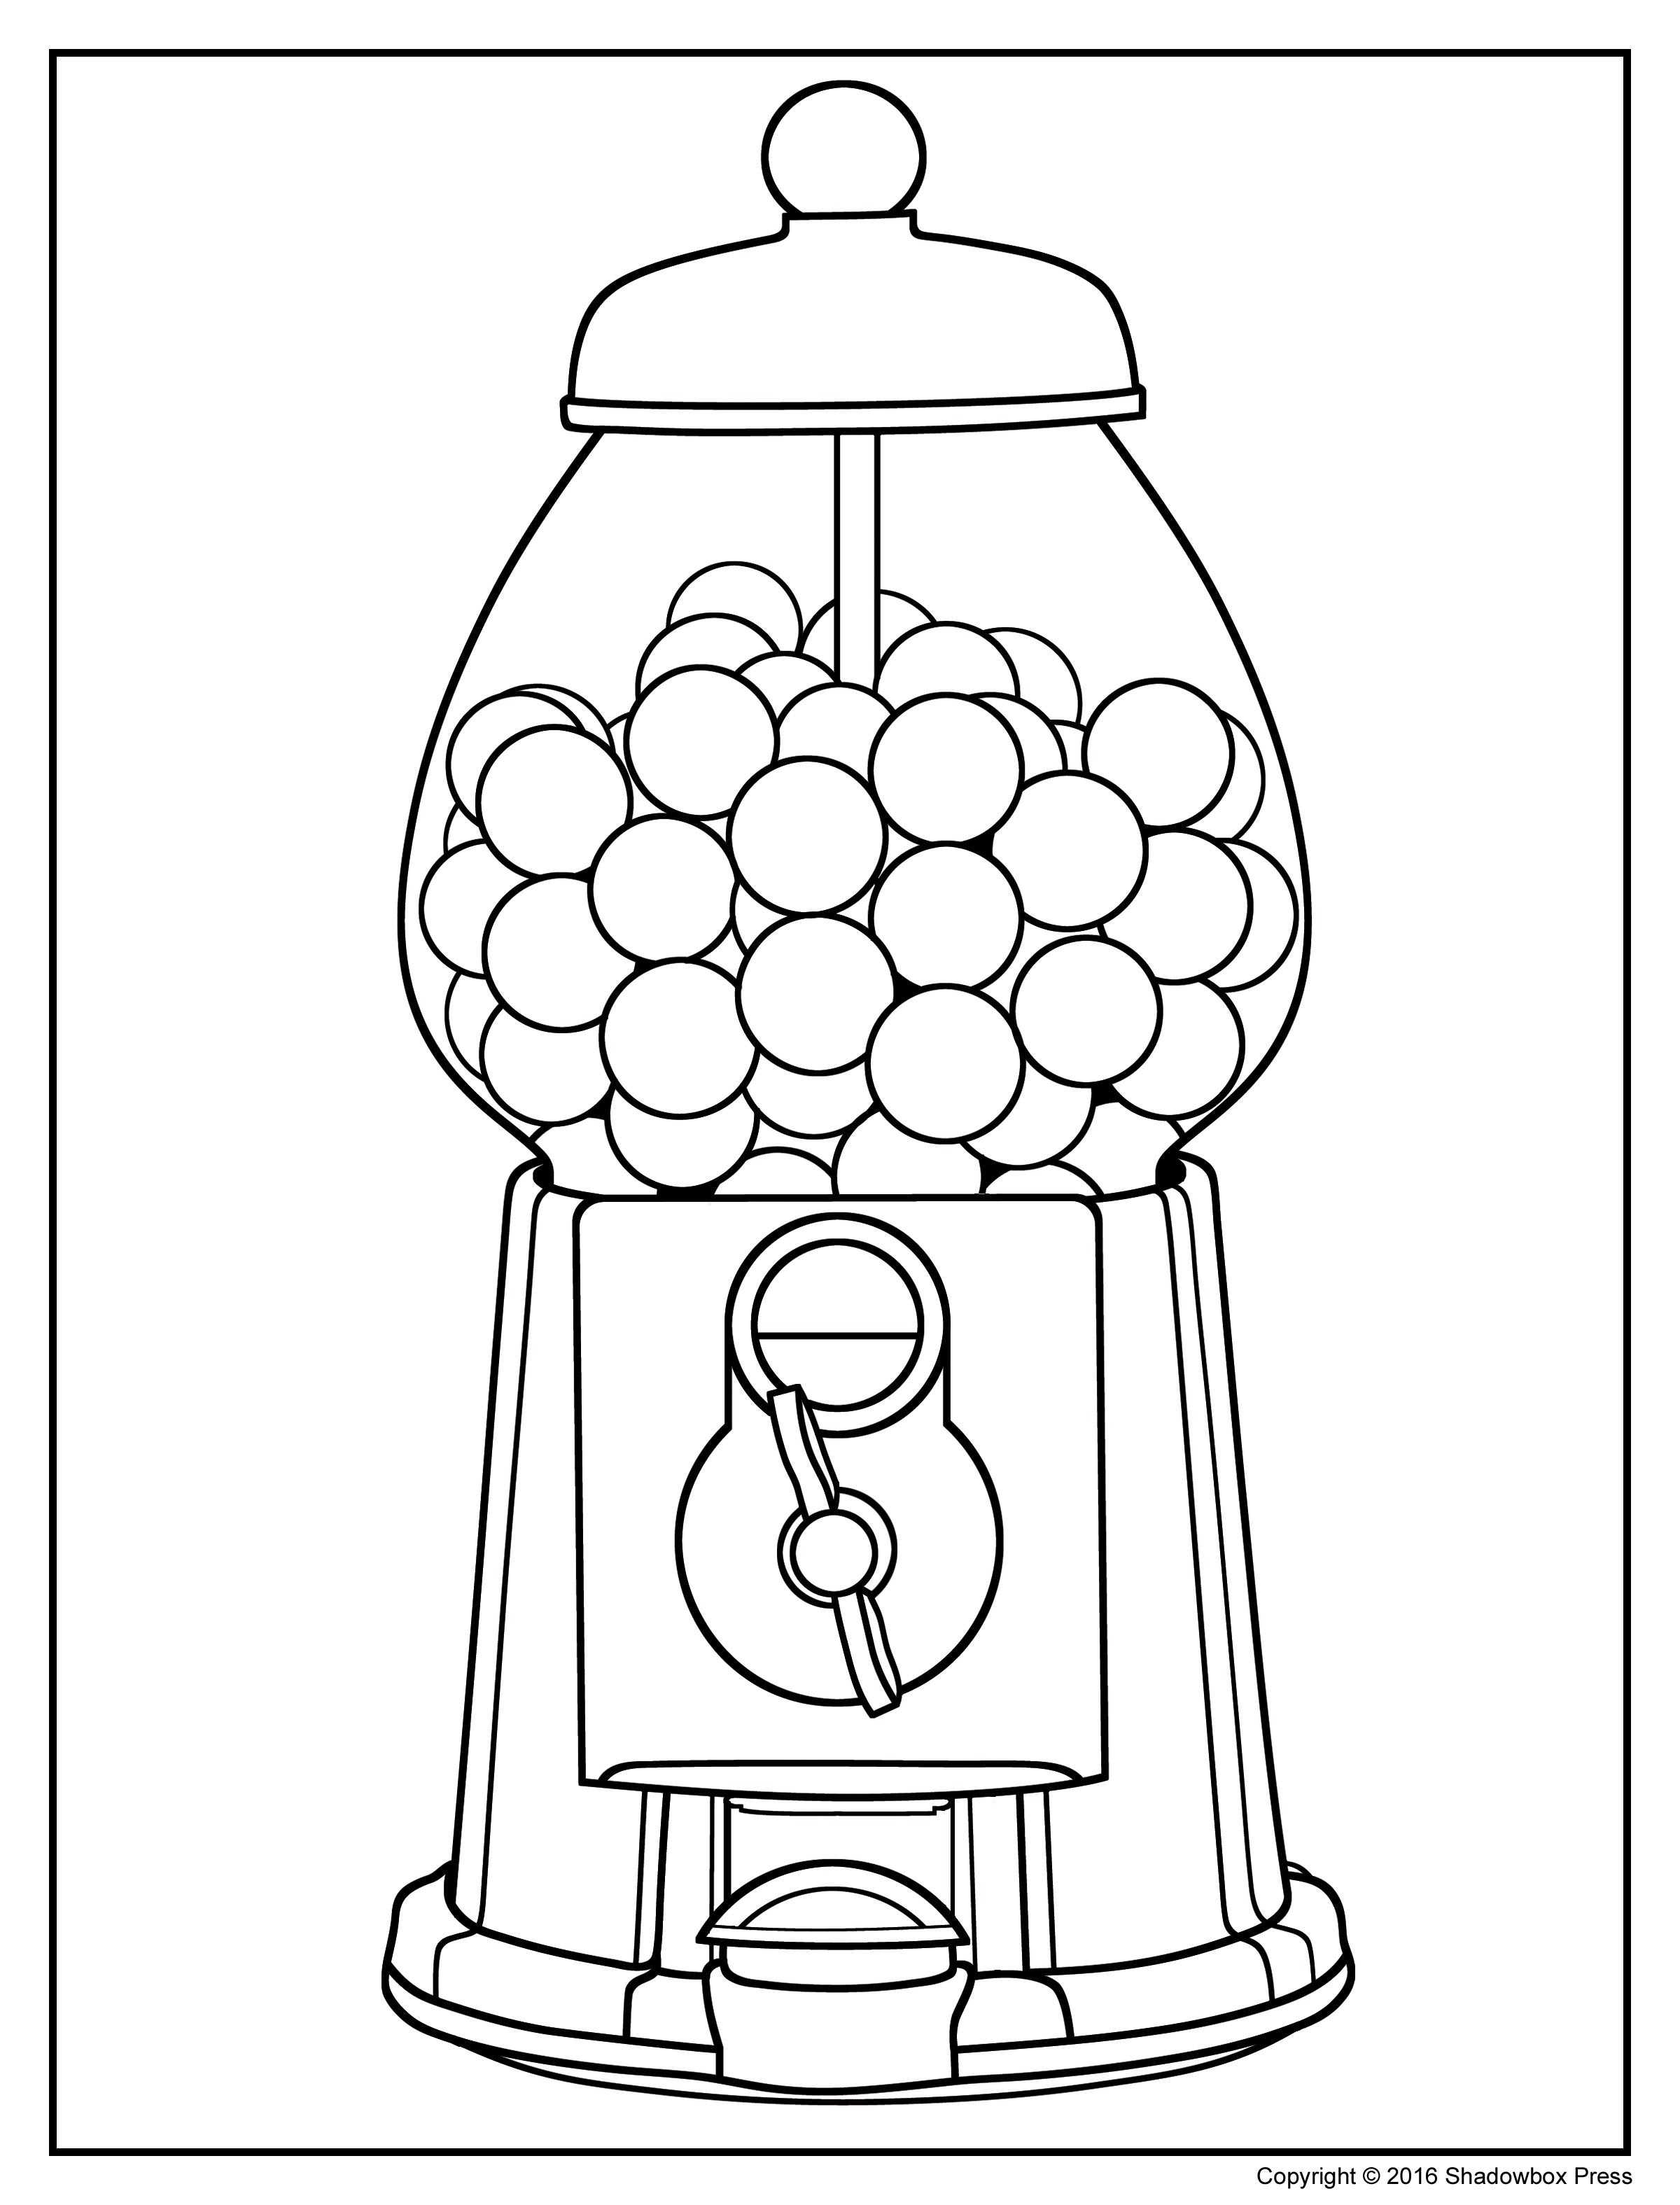 https://cdn.shopify.com/s/files/1/0523/7737/files/gumball_machine_coloring__page.jpg?7257536517404105007